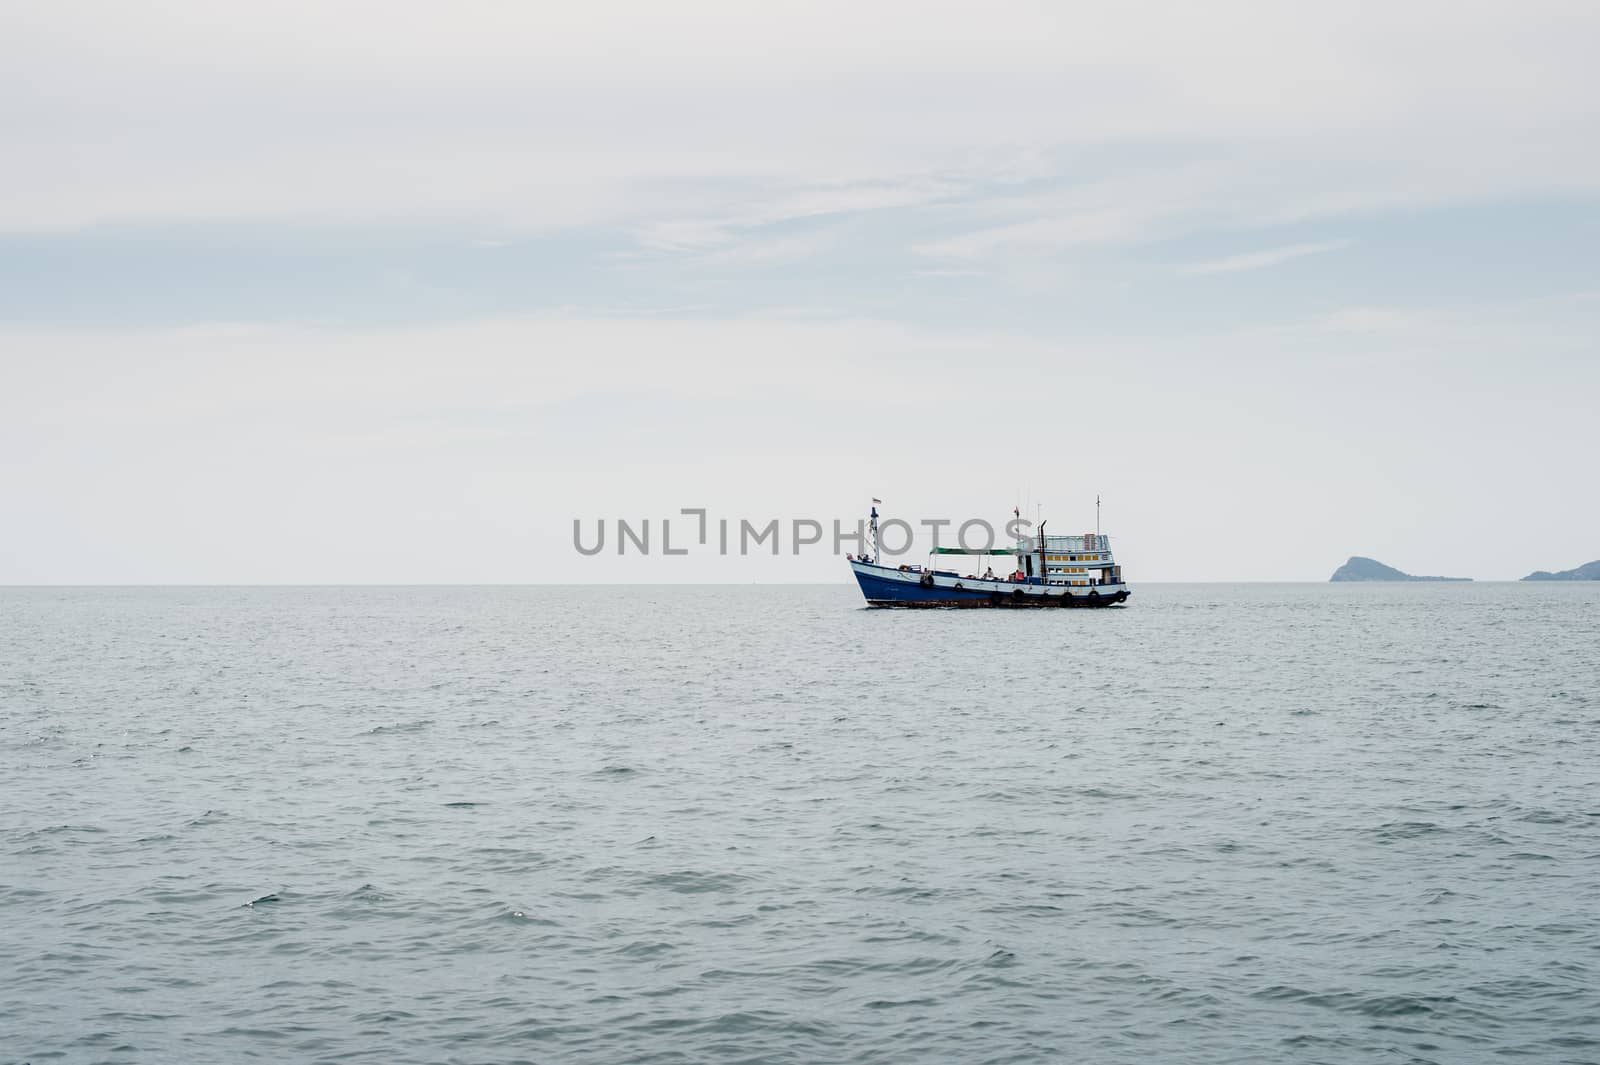 Closeup of boat on the ocean landscape by sayhmog